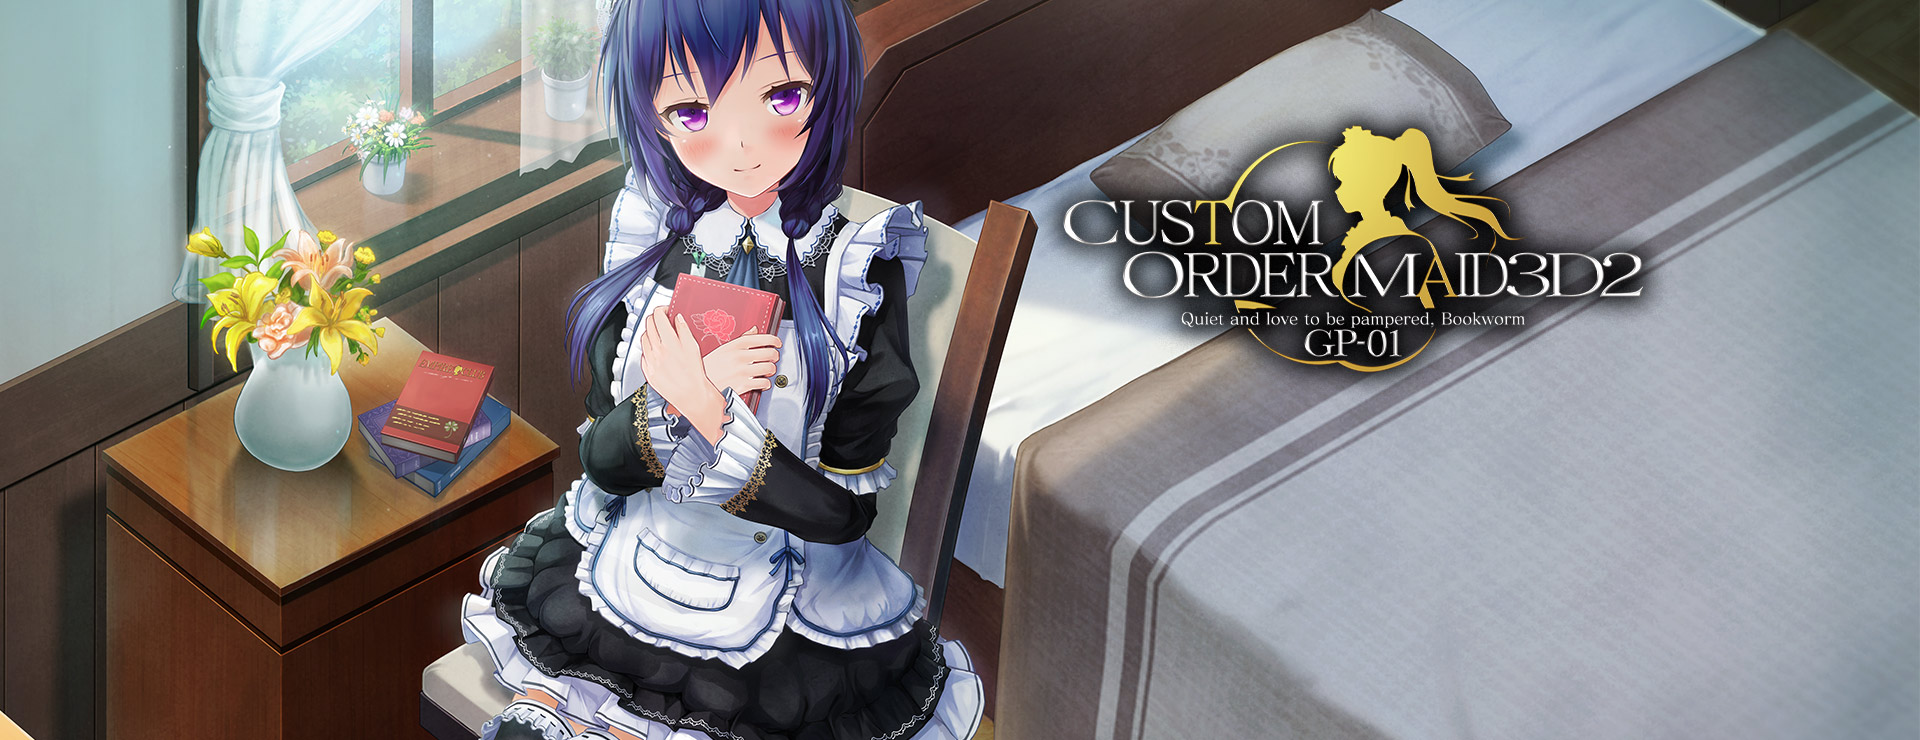 Custom Order Maid 3D2 - Quiet and love to be pampered Bookworm GP-01 DLC - Simulation Spiel